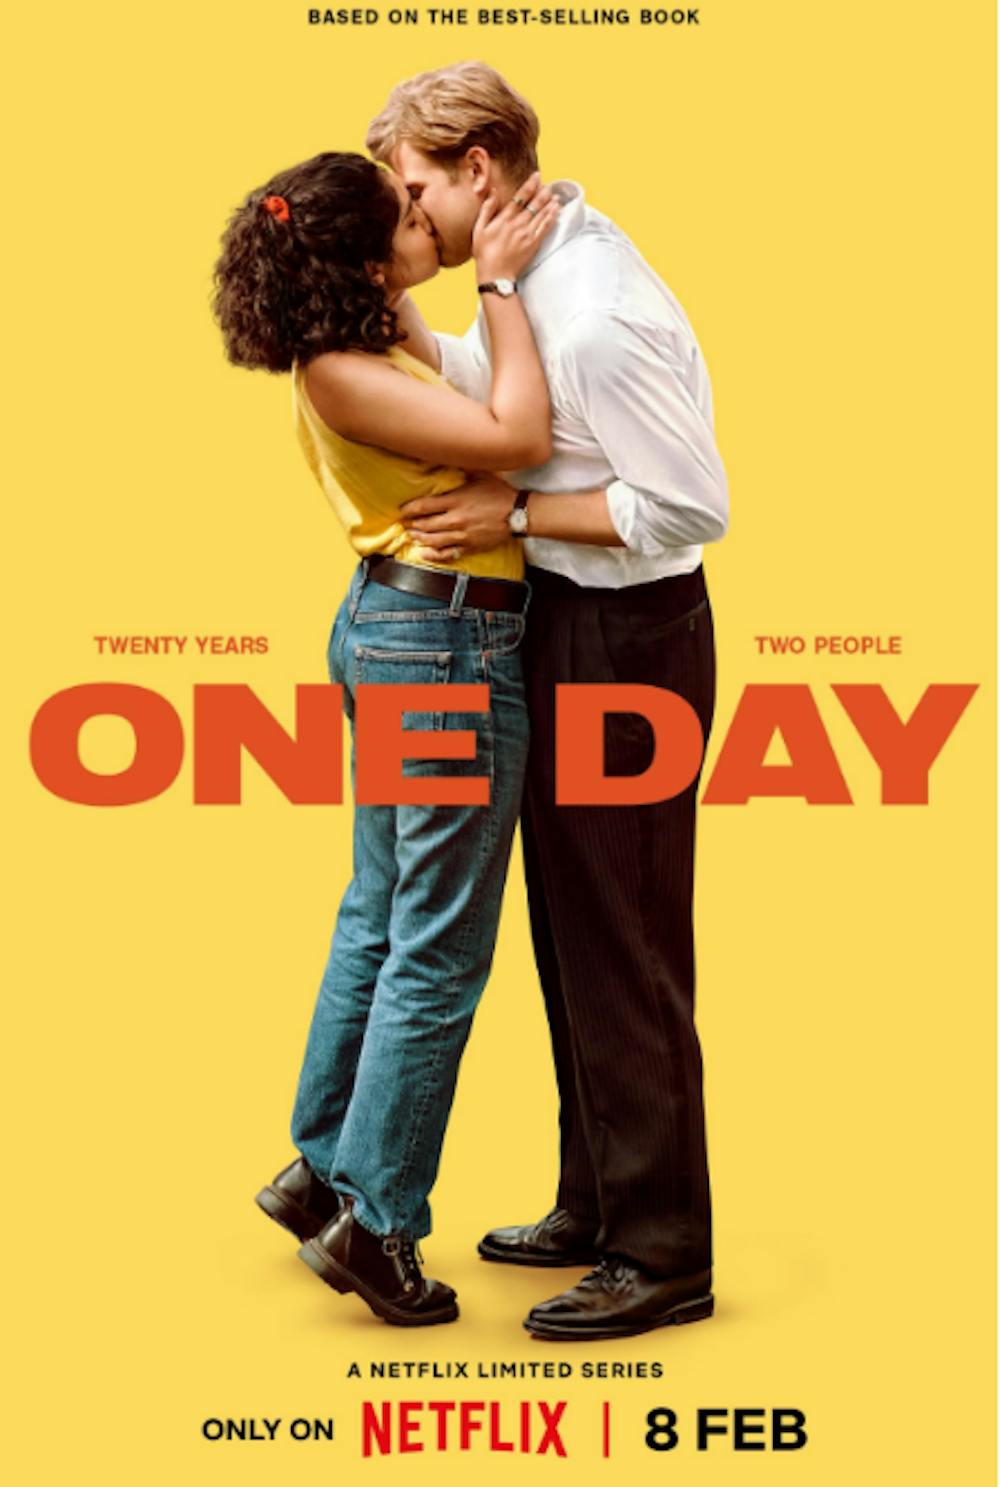 Netflix’s romantic drama ‘One Day’ will leave you gutwrenched The Signal